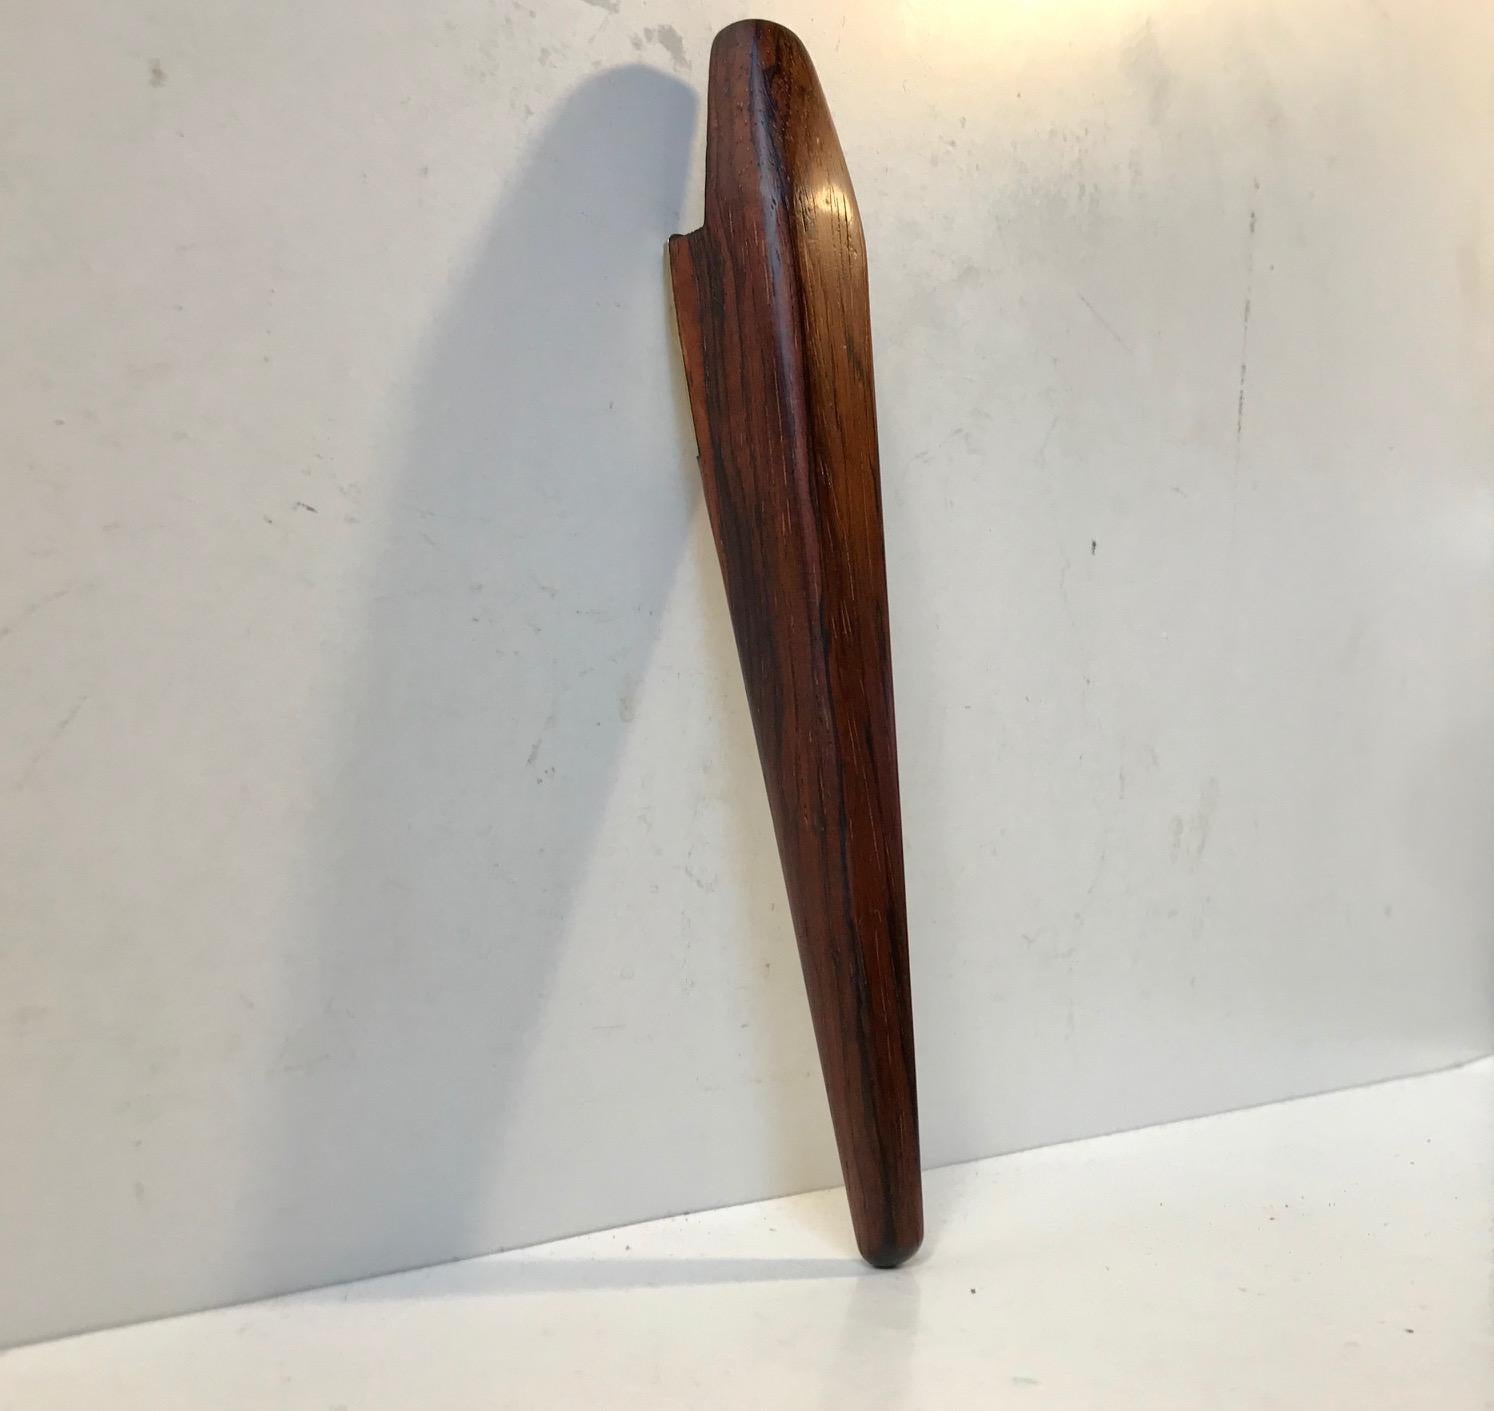 High quality handmade bottle opener in rosewood and brass. Designed by Poul Knudsen in Denmark during the 1960s.